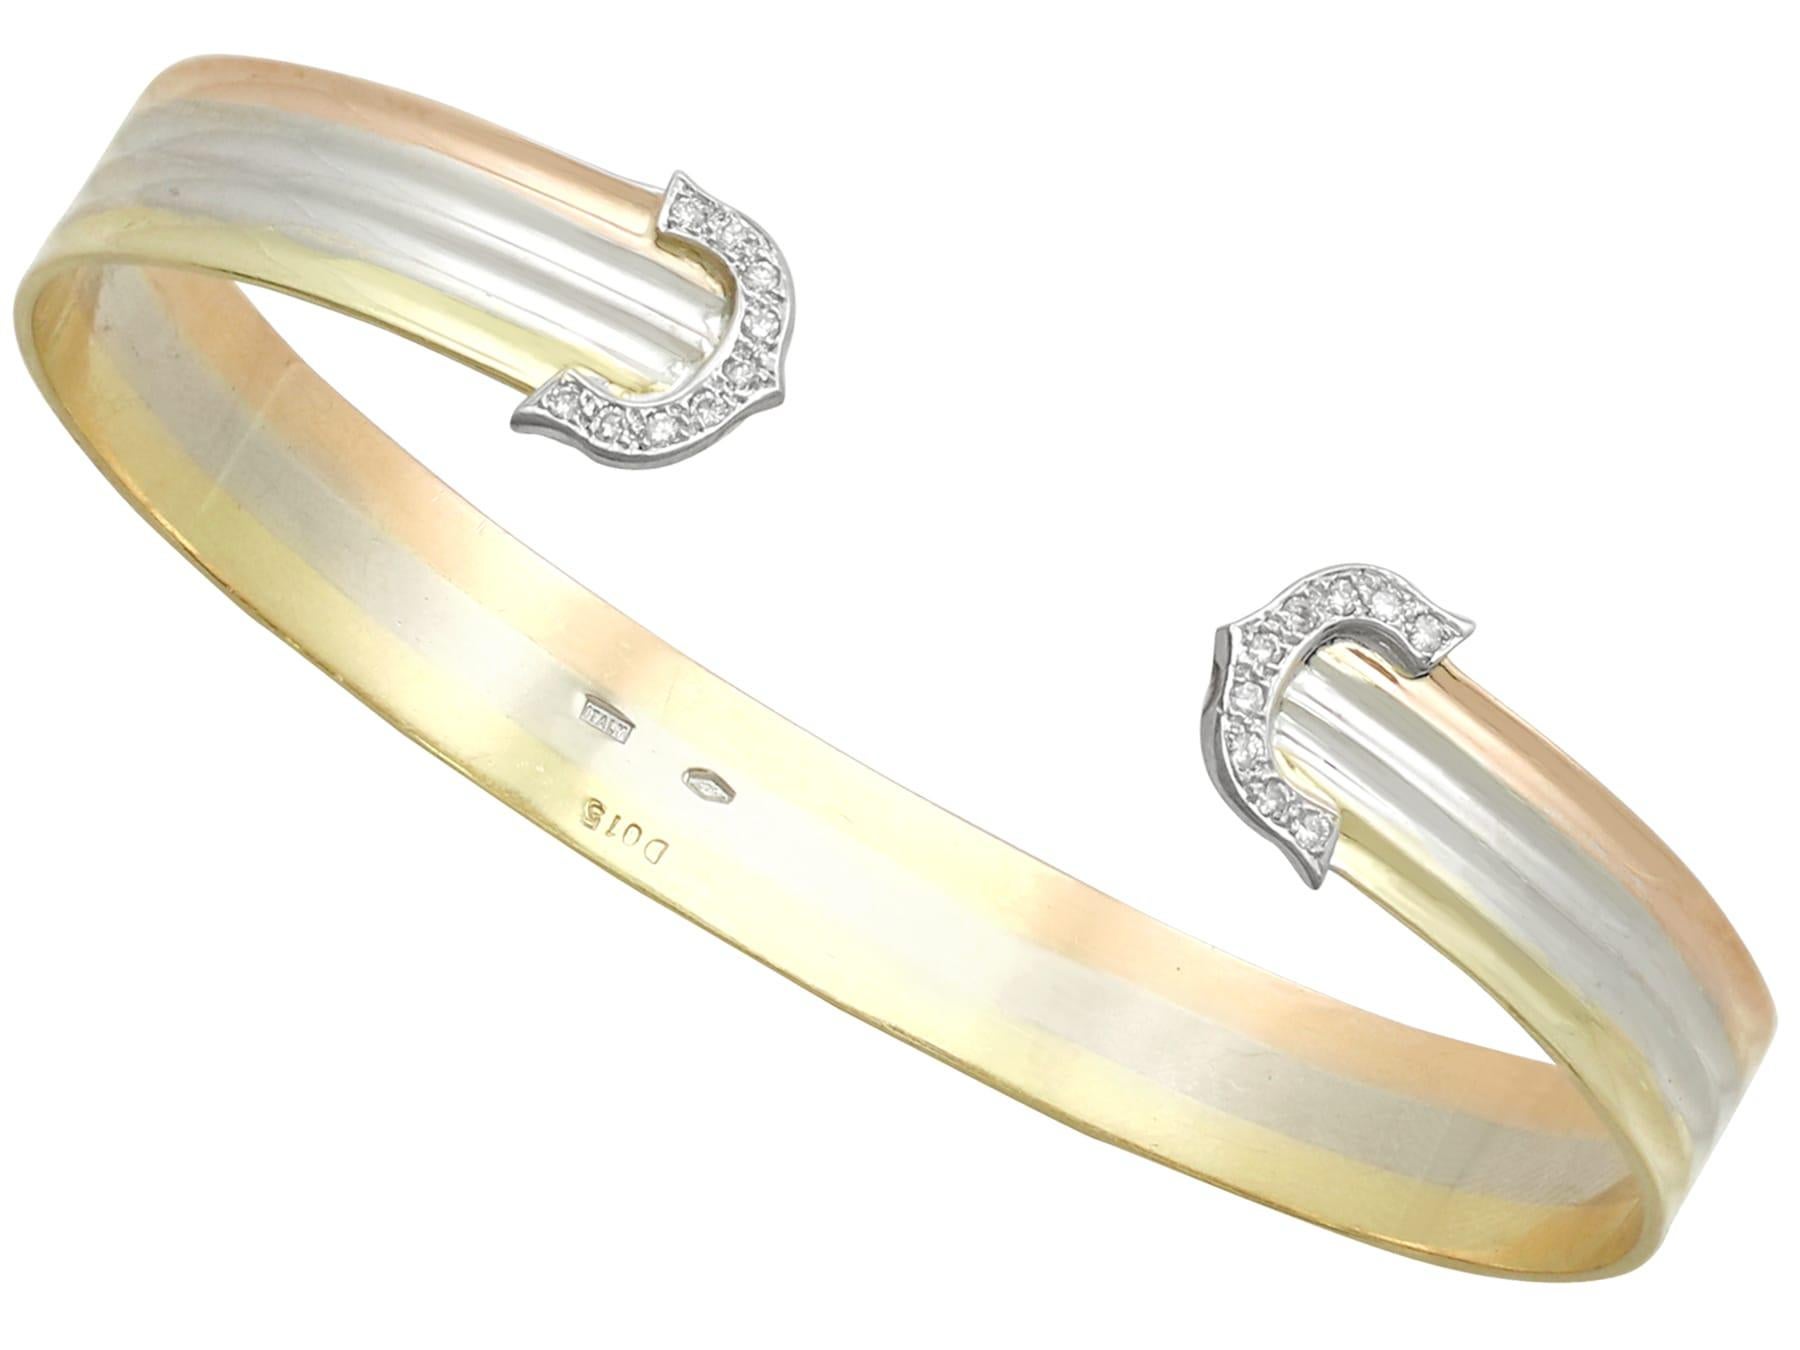 An impressive vintage Italian 0.86 carat diamond and 18 karat white, yellow and rose gold jewelry set of bangle, ring and earrings; part of our diverse diamond jewelry collections.

This fine and impressive vintage gold jewelry set has been crafted